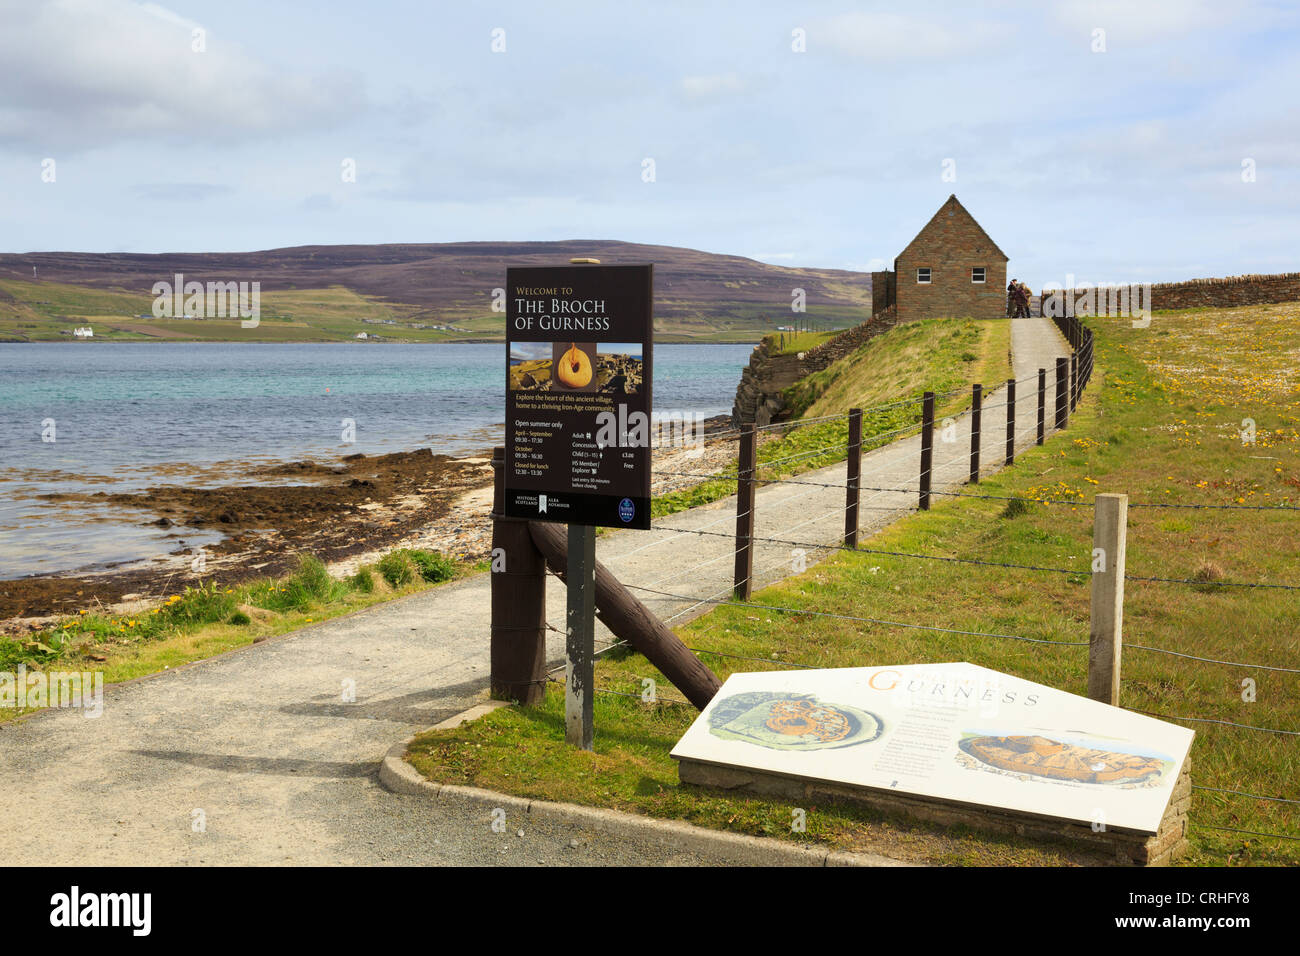 The Broch of Gurness tourist information sign by the entrance to Historic Scotland site at Evie, Orkney Islands, Scotland, UK Stock Photo